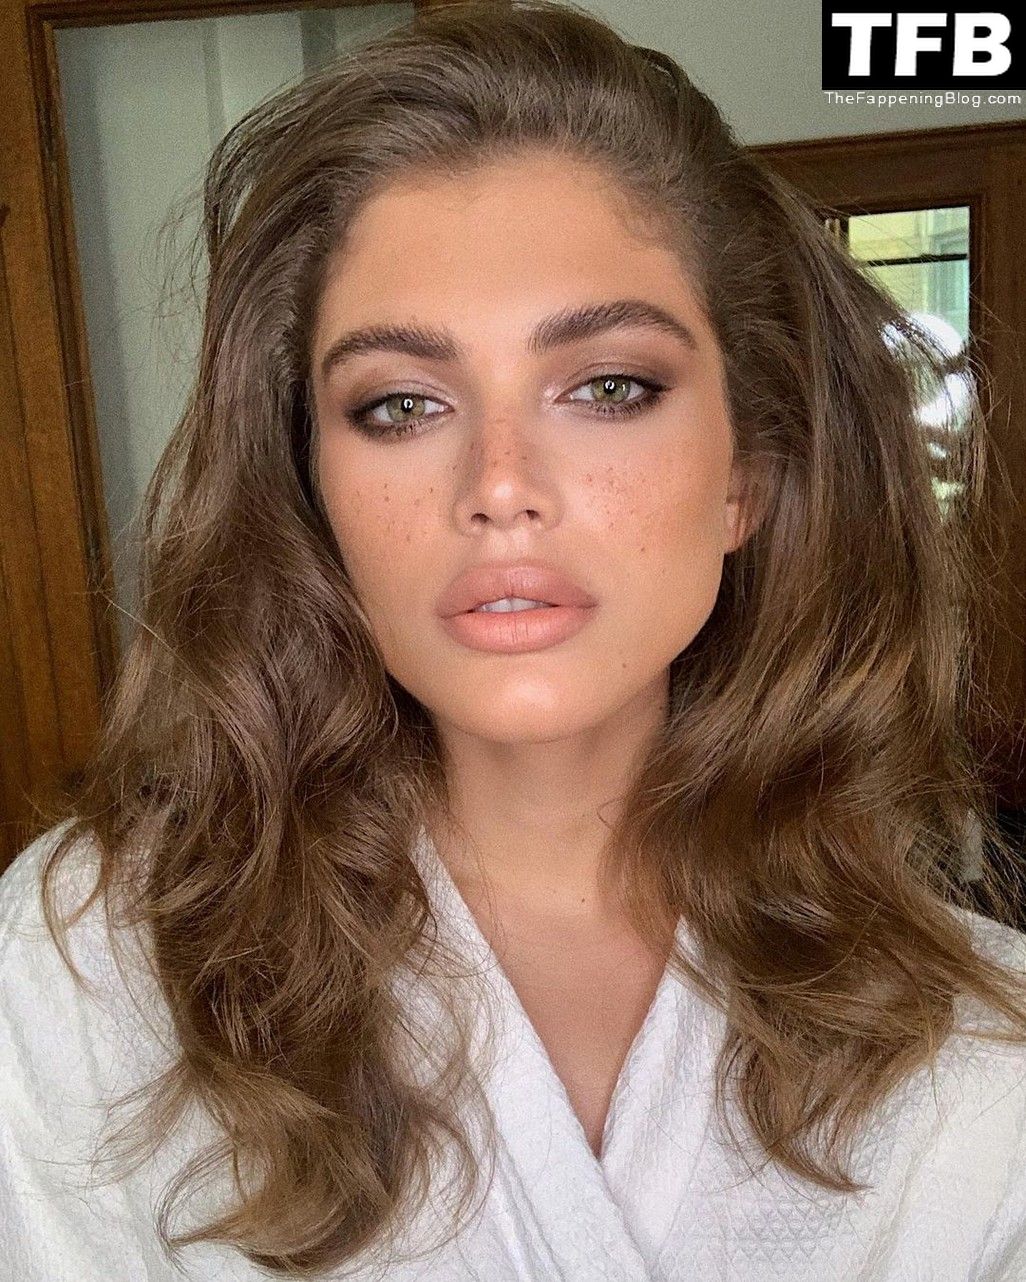 Valentina-Sampaio-So-Cute-In-A-Selfie-That-You-Wont-Guess-She-Was-A-Man-TheFappeningBlog-6.jpg